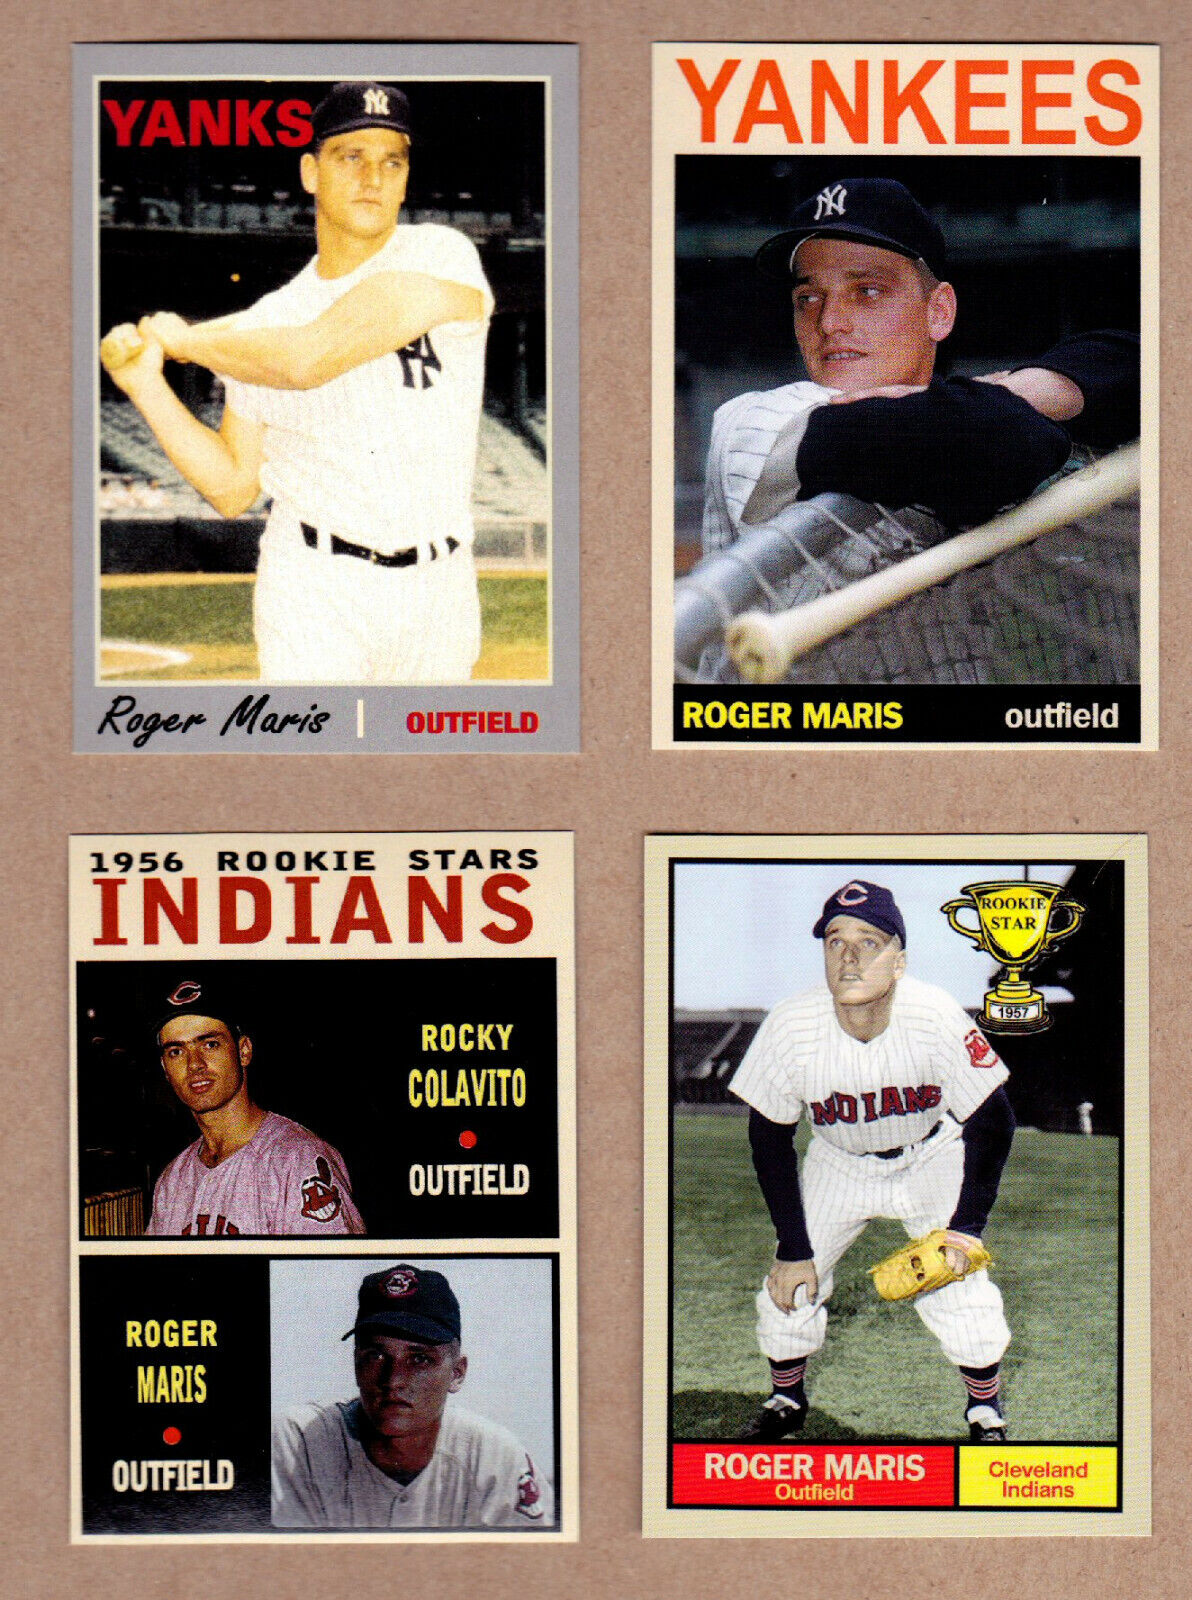 ROGER MARIS LOT OF 4: ROOKIE YEAR/61 HRS/WITH COLAVITO/CLEVELAND INDIANS Без бренда